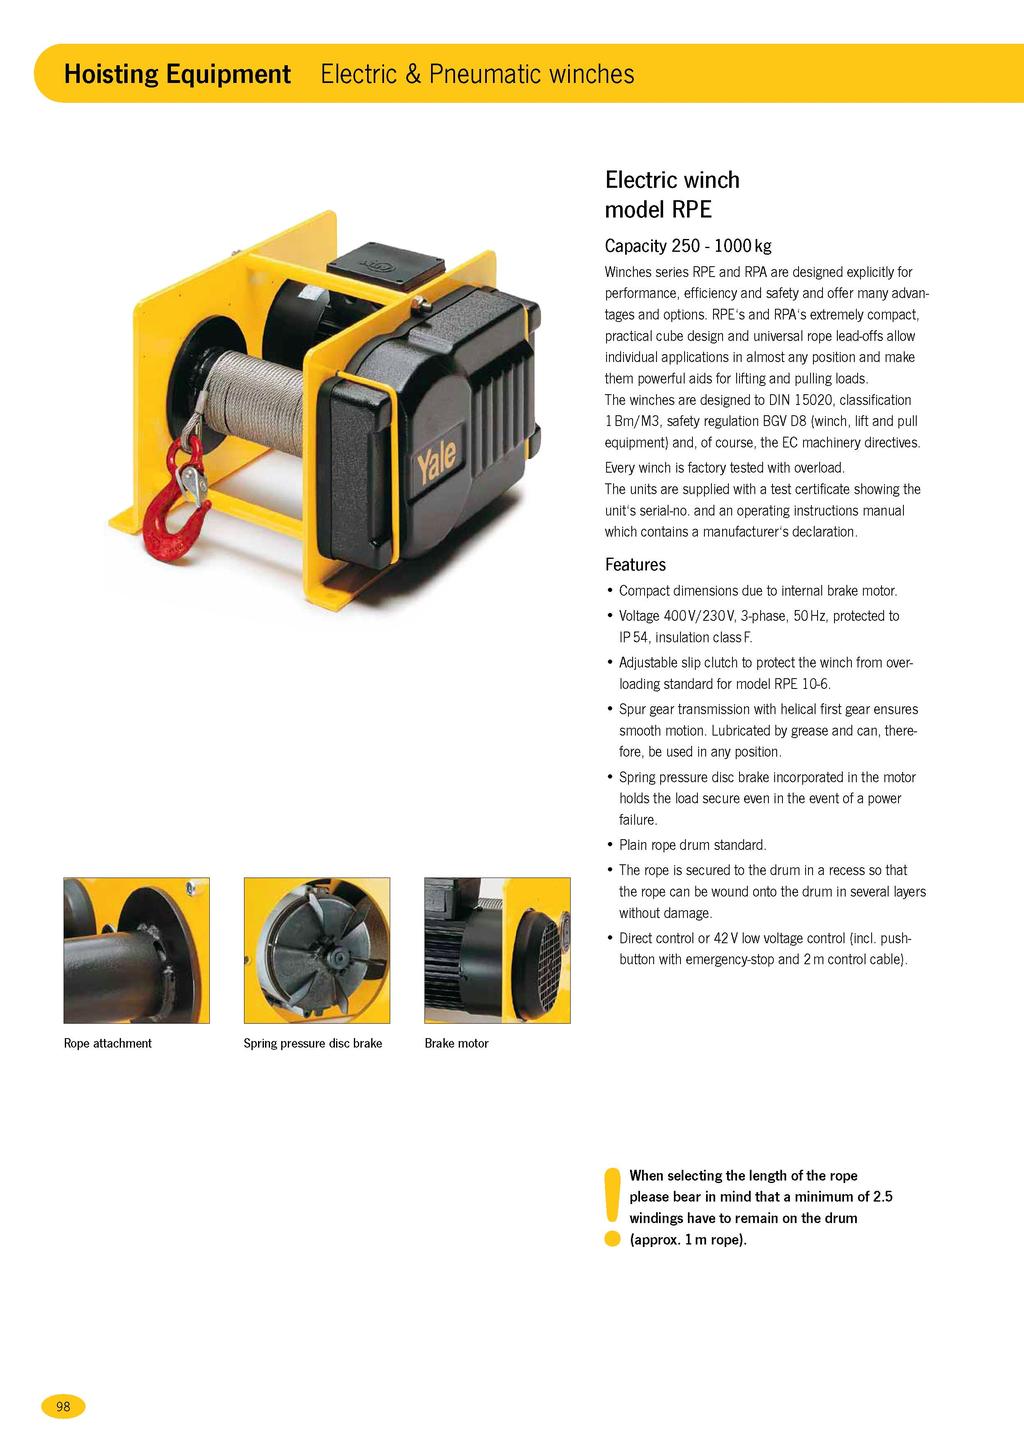 Electric winch odel RPE 250-1000 Winches series RPE and RPA are designed explicitly for perforance, efficiency and safety and offer any advantages and options.